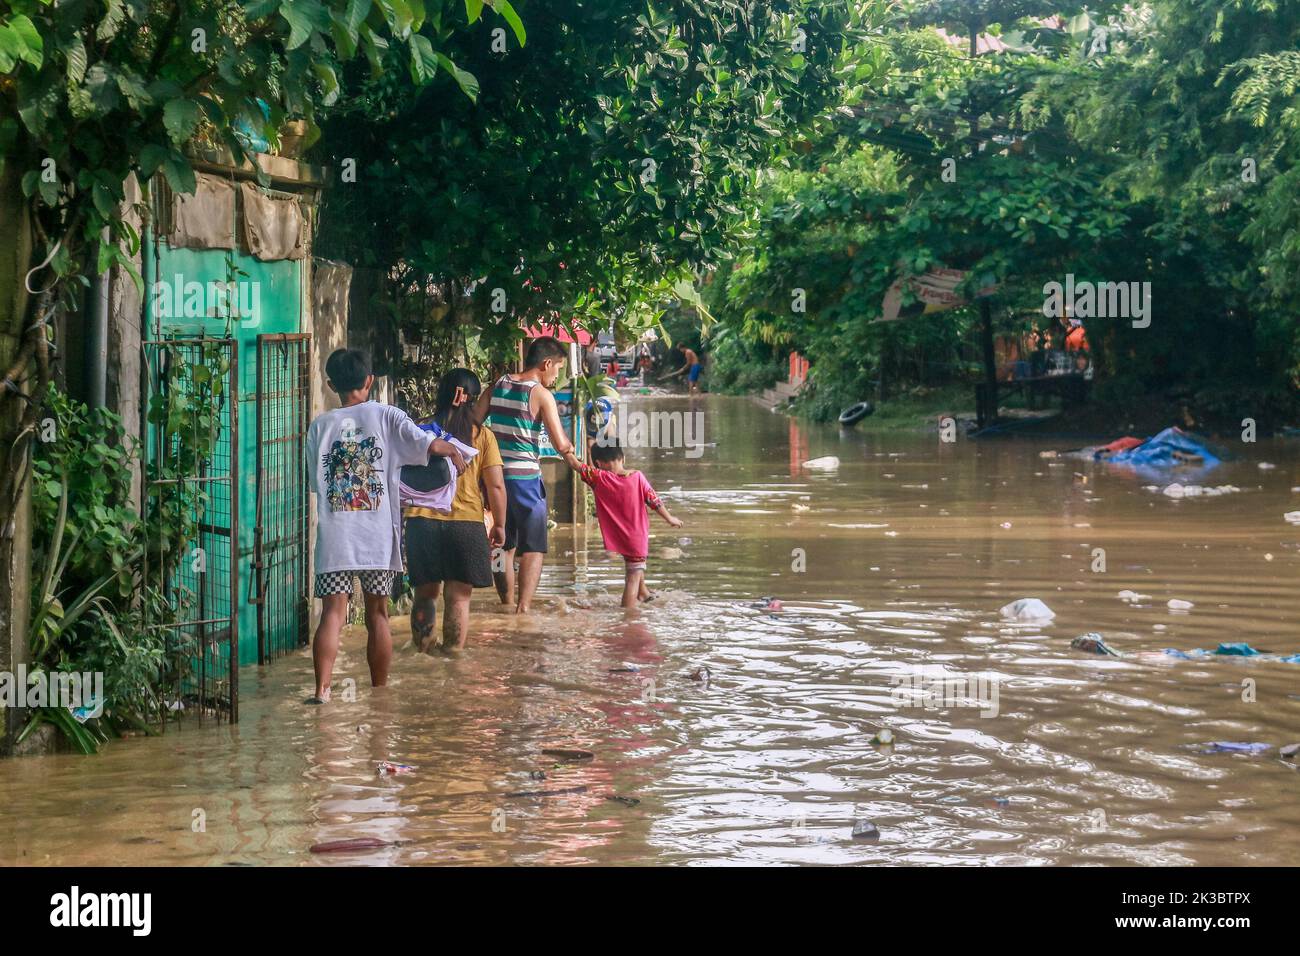 Marikina, Philippines. 26th Sep, 2022. Super typhoon victims walk on a flooded area to return on their properties after the raged of Noru. Super Typhoon Noru locally named as Karding battered in the landmass of Luzon island in the Philippines. Noru with the wind of 140 kilometers per hour near the center and gustiness of up to 170 km per hour forcing the evacuation of thousands of individuals specially in hardly hit and catch basin areas. (Photo by Ryan Eduard Benaid/SOPA Images/Sipa USA) Credit: Sipa USA/Alamy Live News Stock Photo